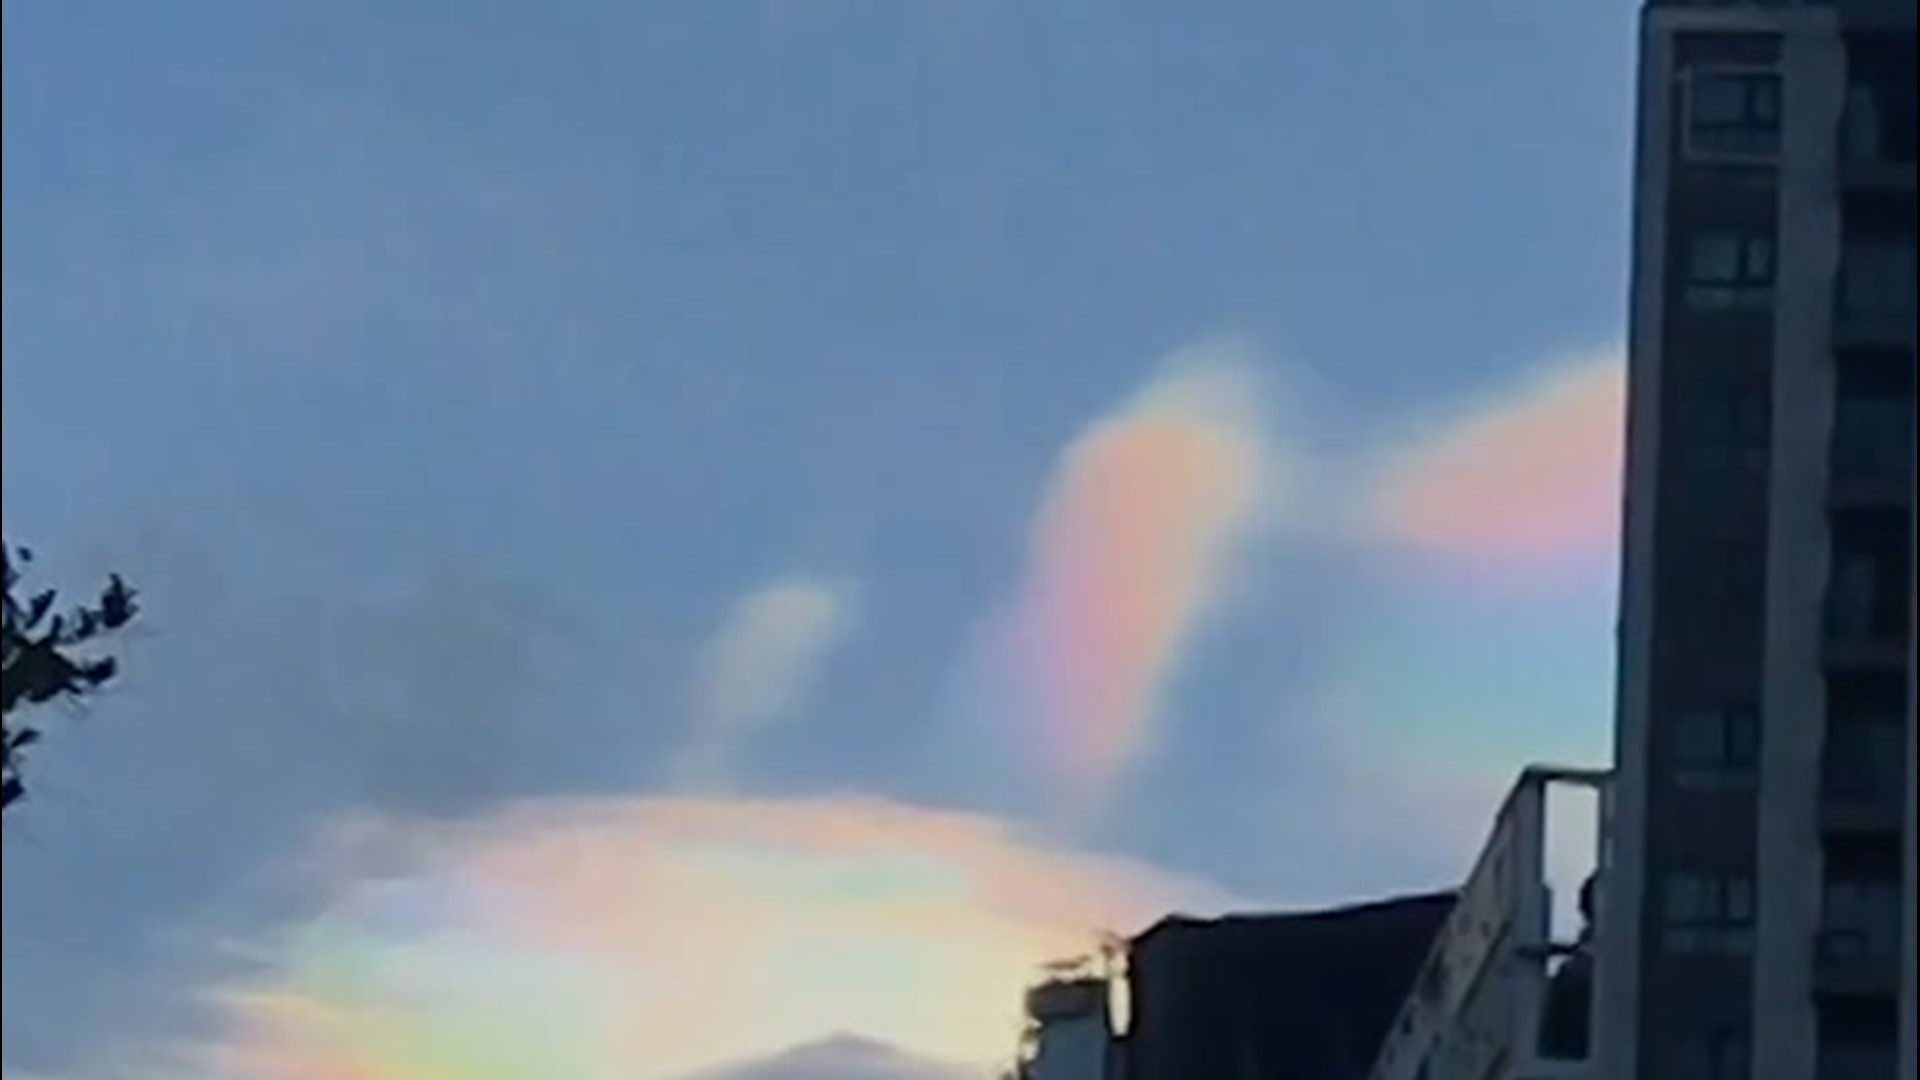 The clouds over Bangkok, Thailand, were colorful on June 2, as a weather phenomenon known as cloud iridescence caused rainbows in the clouds.